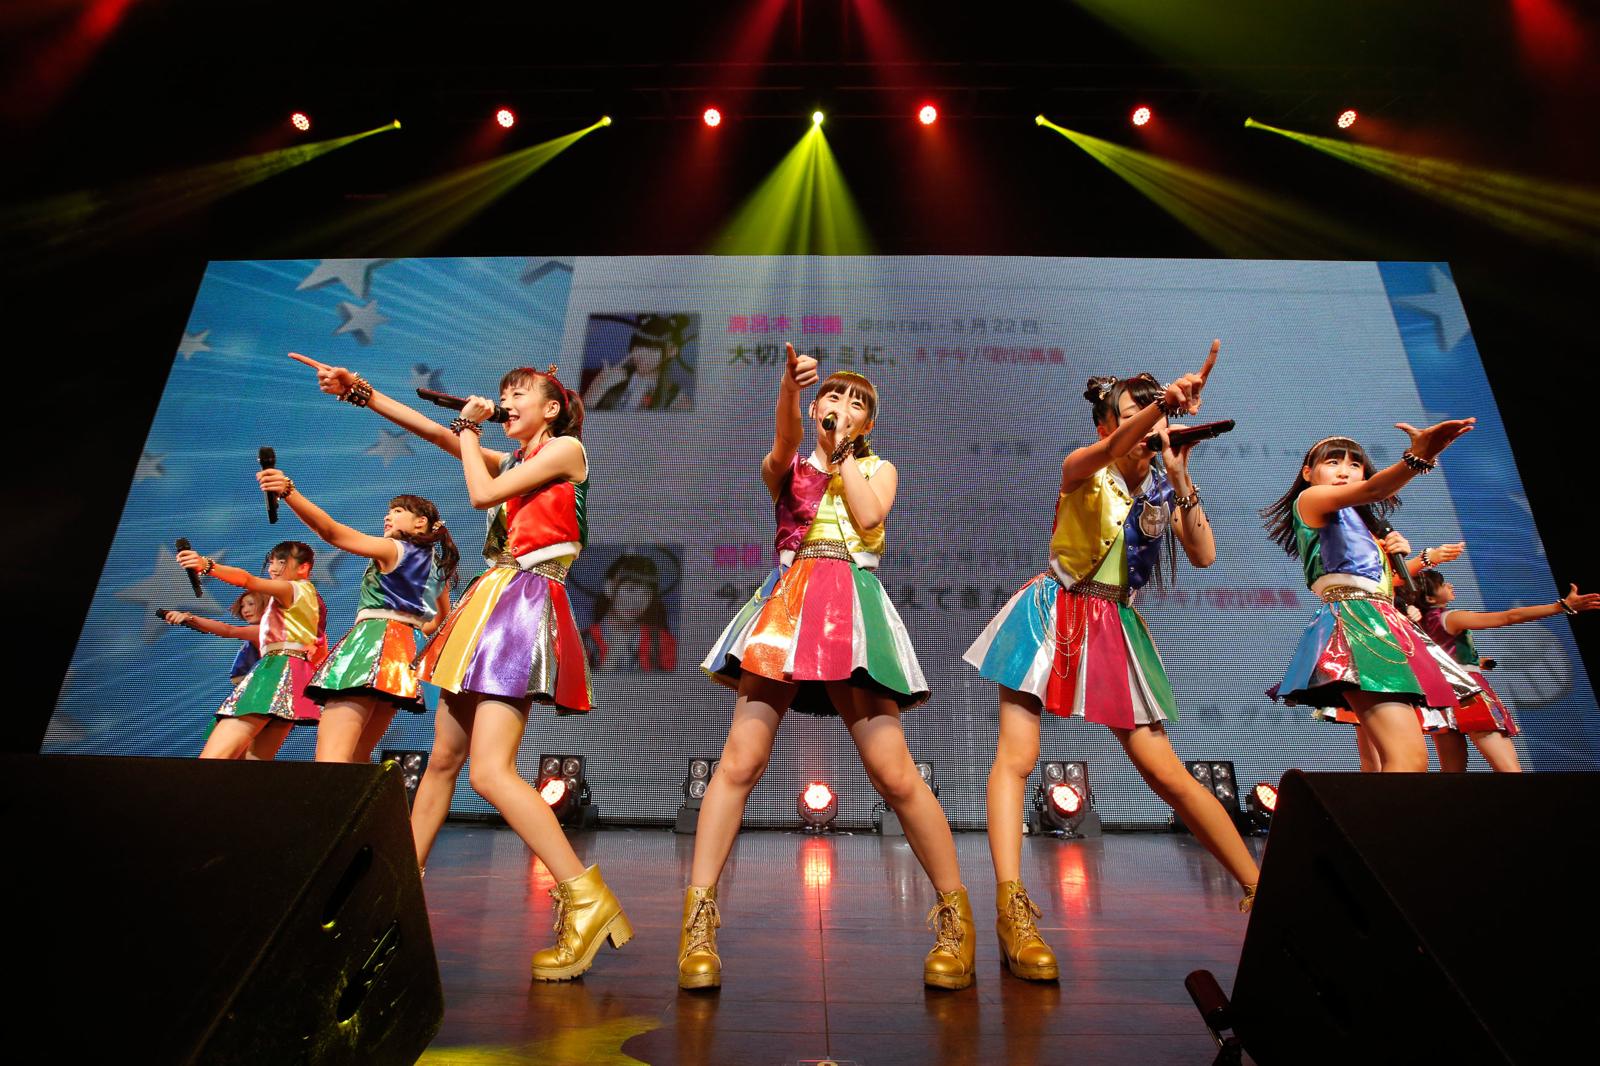 Check Out the Digest Movie for Cheeky Parade Premium Live “The First”